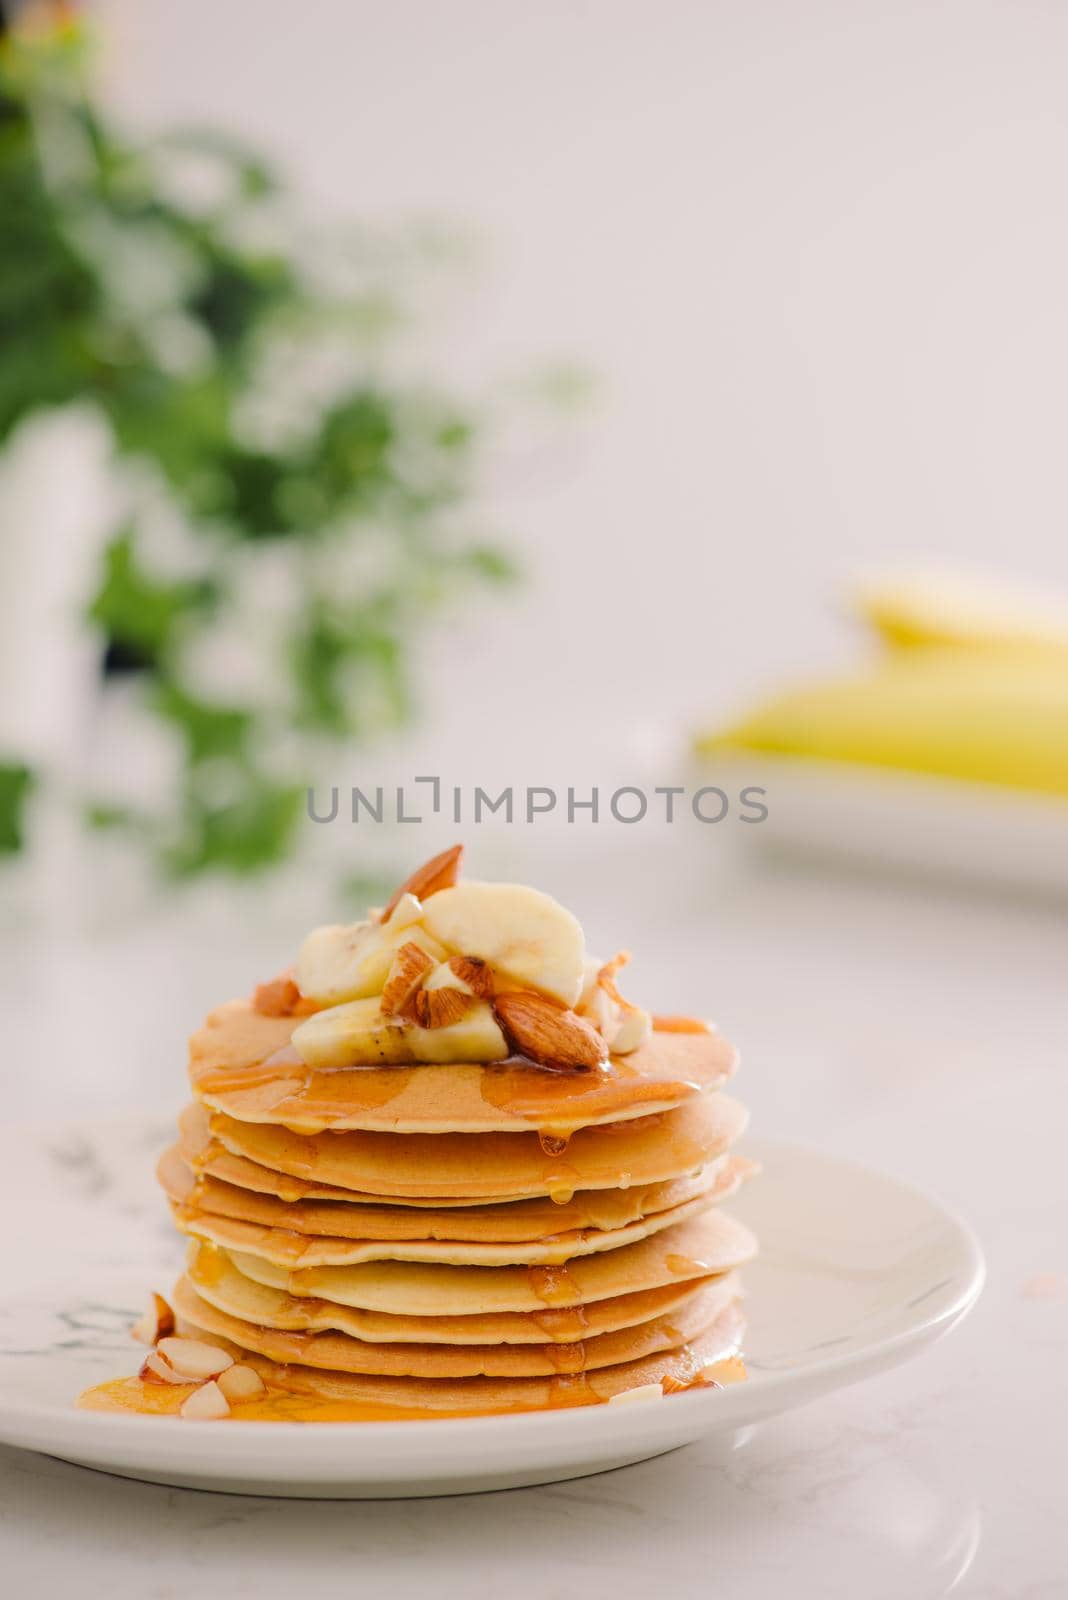 banana cashew pancakes with bananas and salted caramel sauce. the toning. selective focus by makidotvn